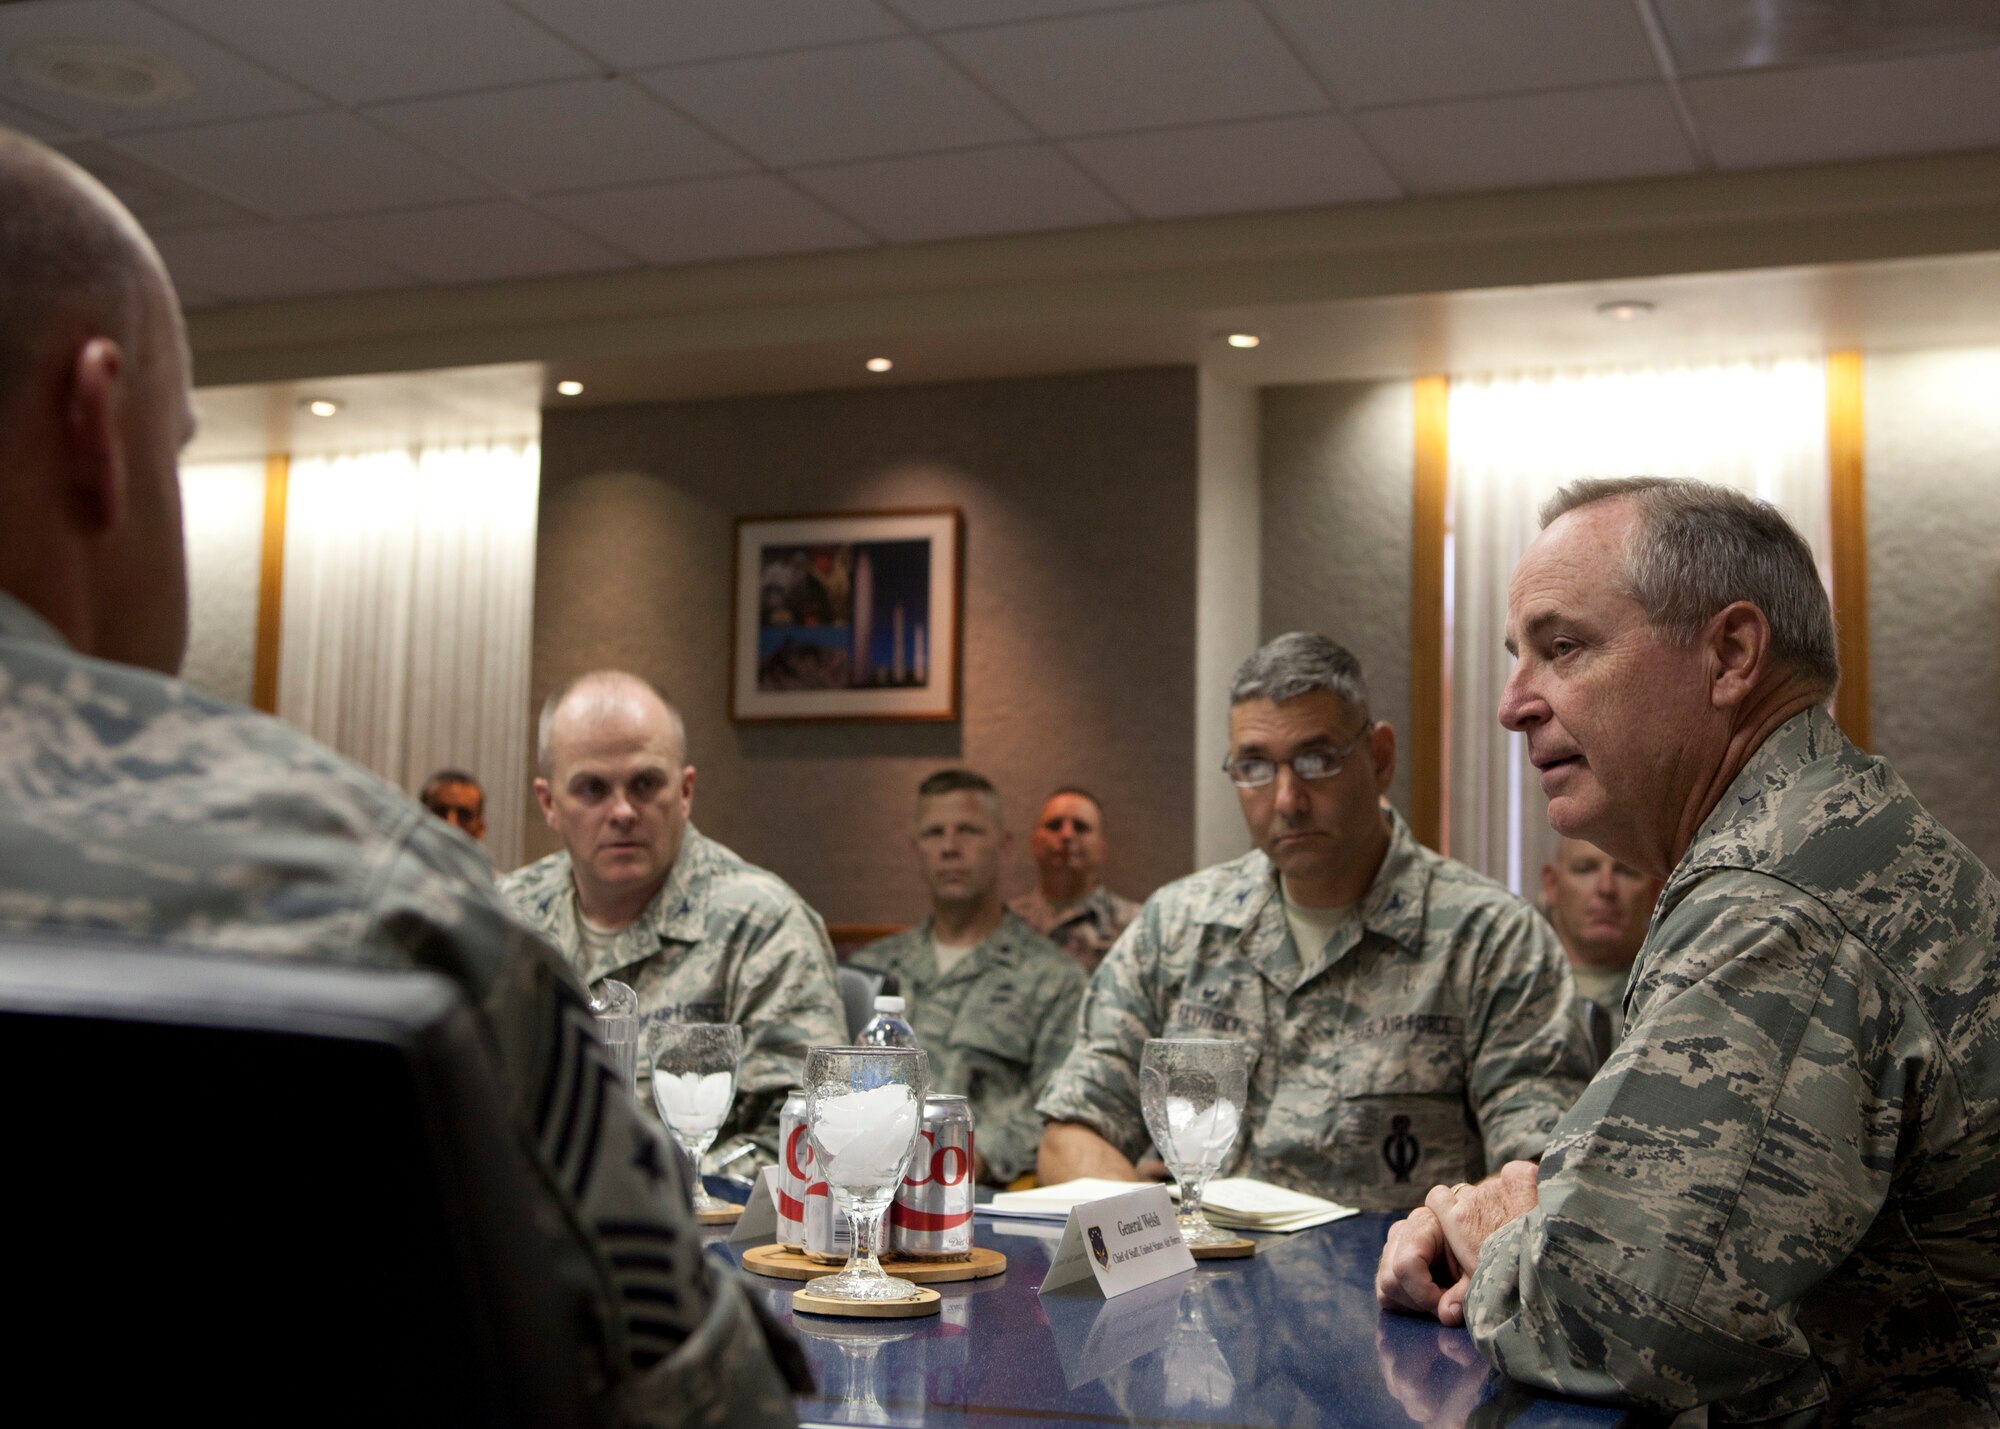 Air Force Chief of Staff Gen. Mark A. Welsh III meets with 90th Missile Wing leadership in a roundtable discussion on F.E. Warren Air Force Base, Wyo., Aug. 3, 2015. Welsh visited Warren to meet with leadership and reinforce nuclear mission responsibilities and expectations to ensure the rigorous standards of the nuclear enterprise are met. (U.S. Air Force photo by Lan Kim)